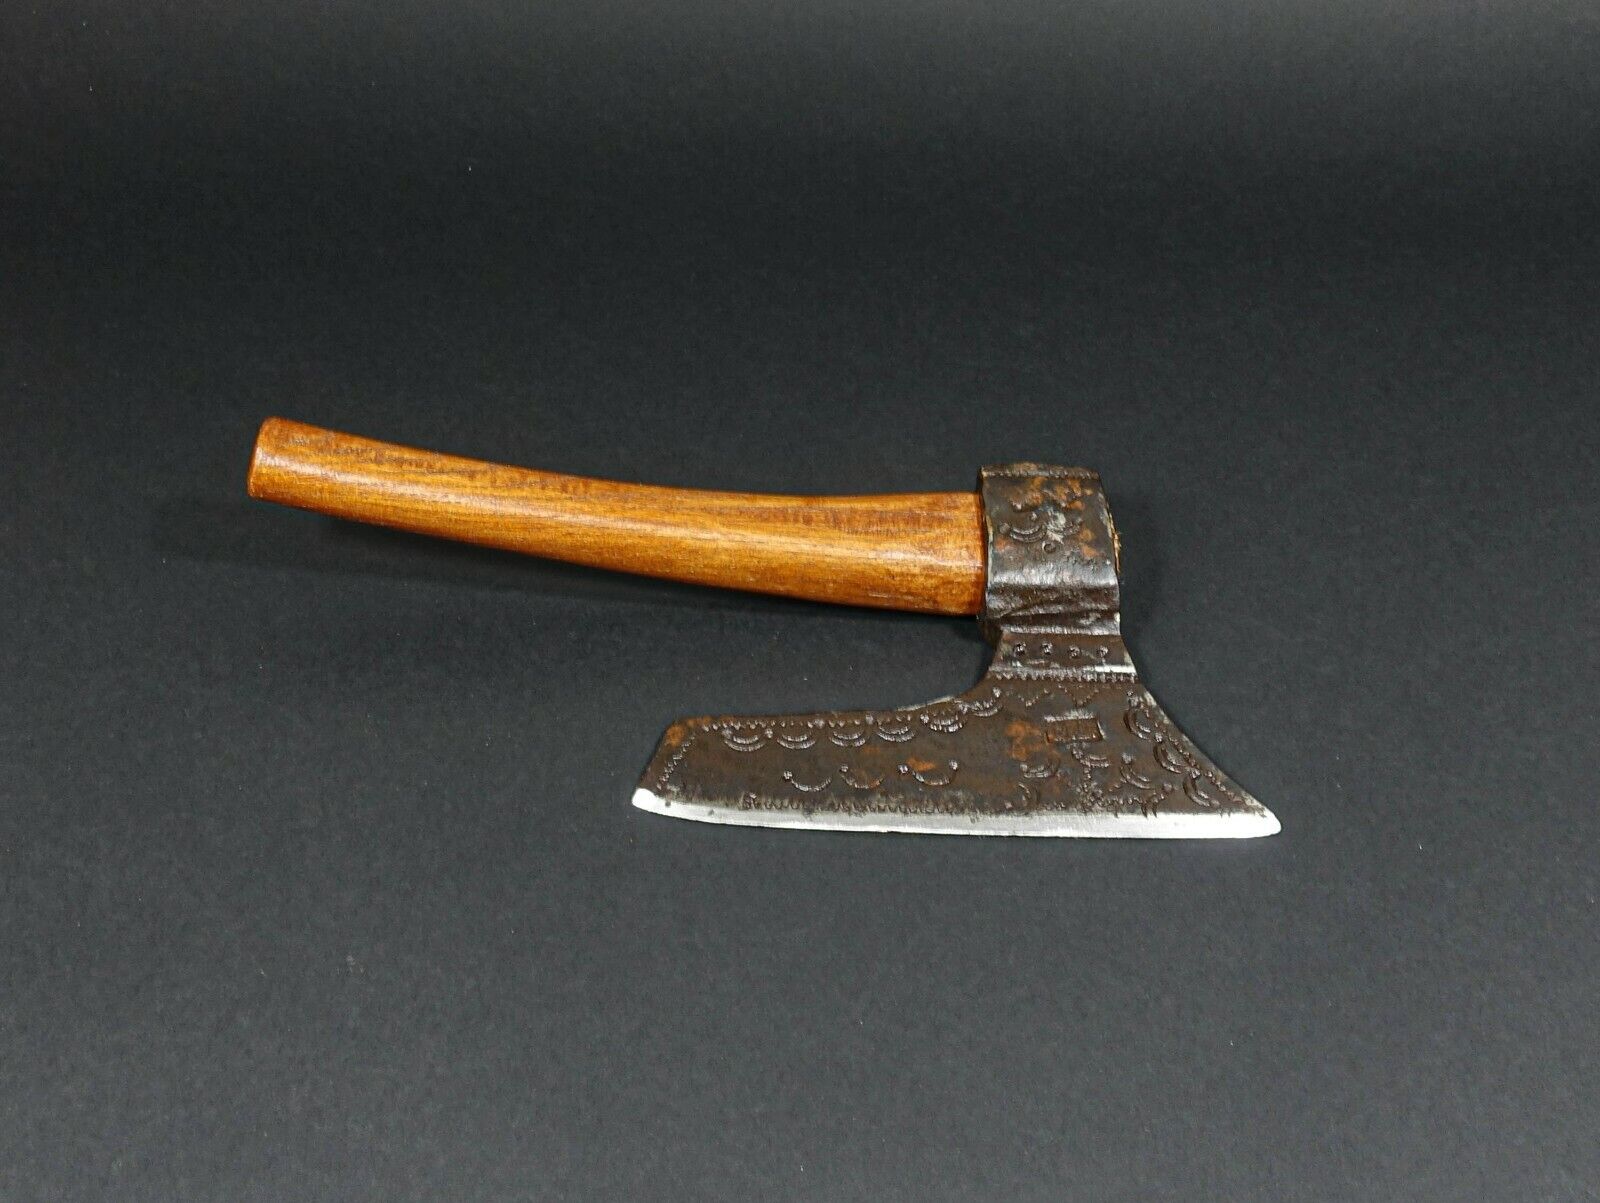 ANTIC Goosewing Bearded Broad Hatchet Axe Head Handmade Forged Rare